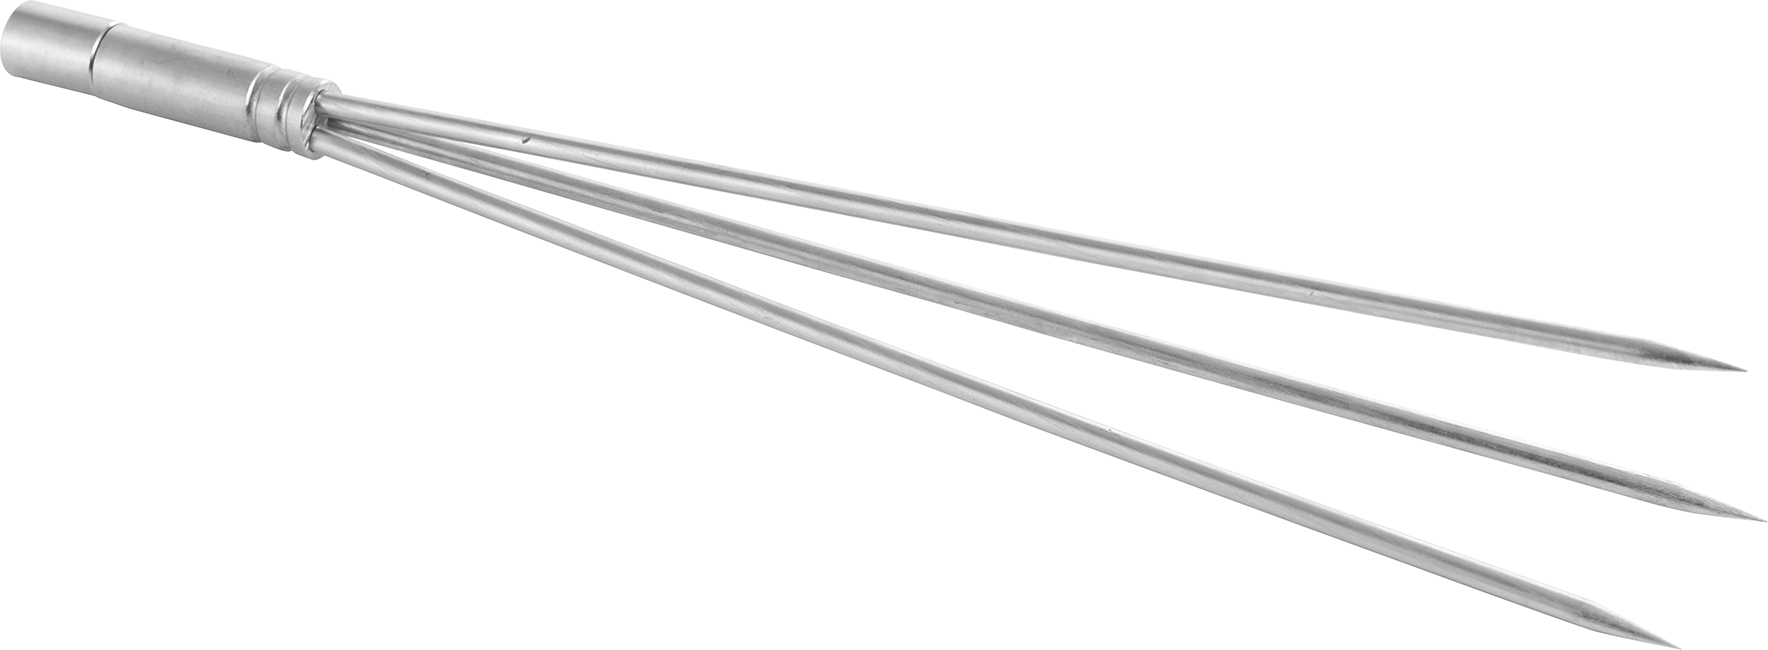 Cressi Paralyzer Tip (3 Barbless Prongs) [Pole Spears] Cressi